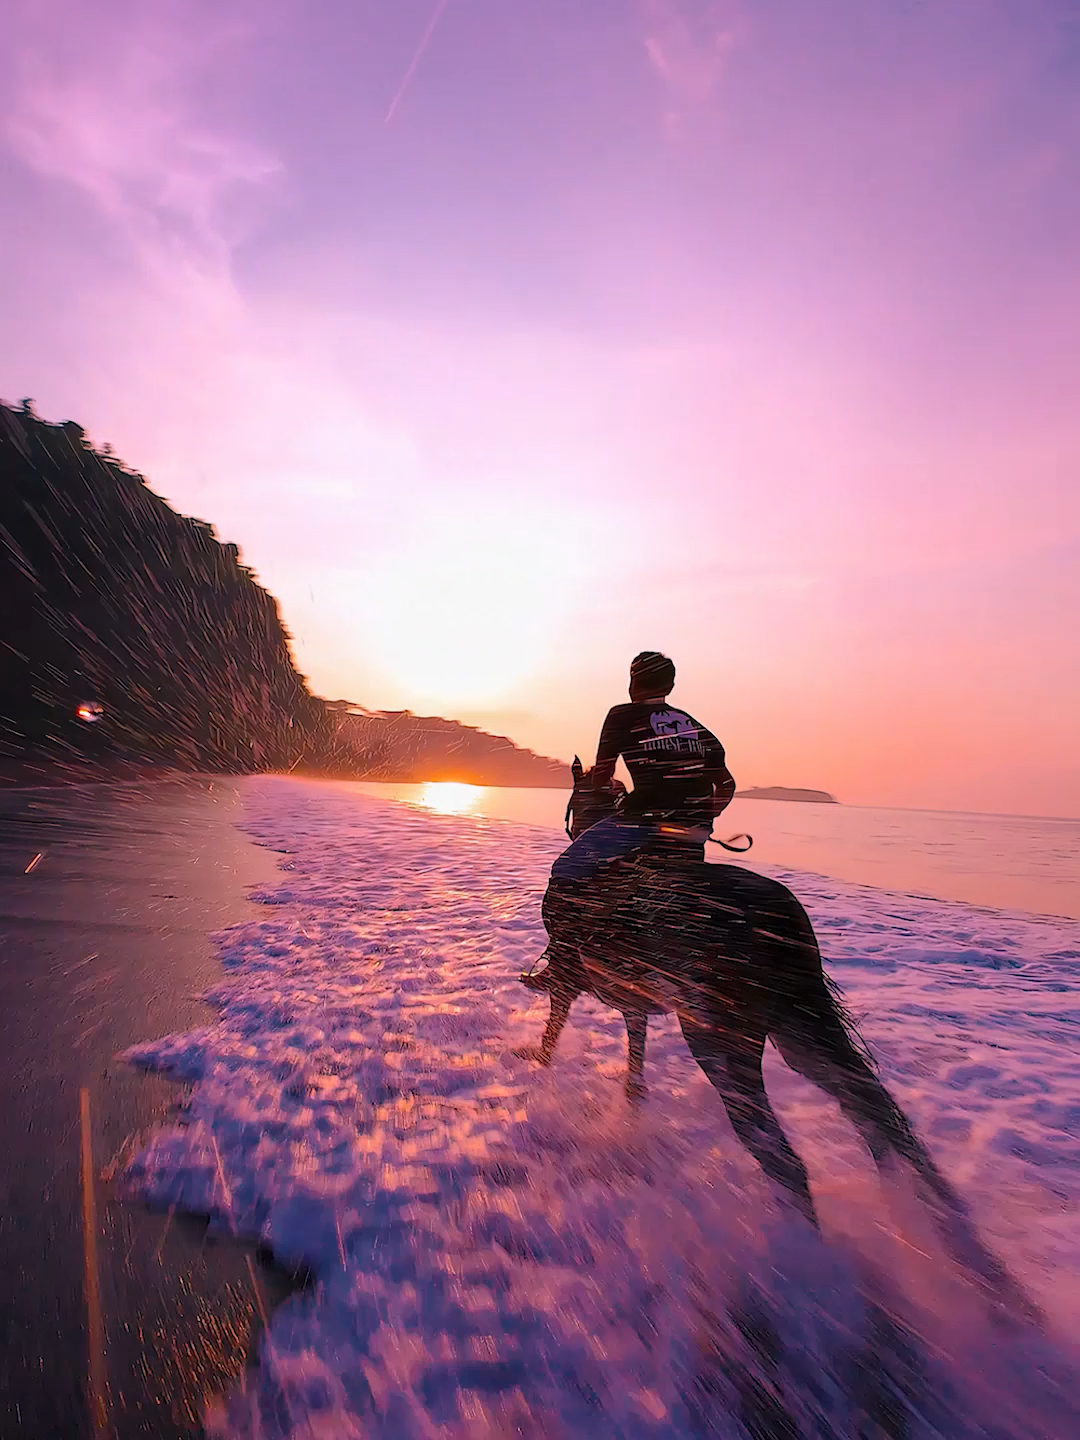 Riding off into the sunset with a dream and an #avata2  🎥: @fabreezy_  #sunsetbeach #horsebackriding #fpv #fpvdrone #dji